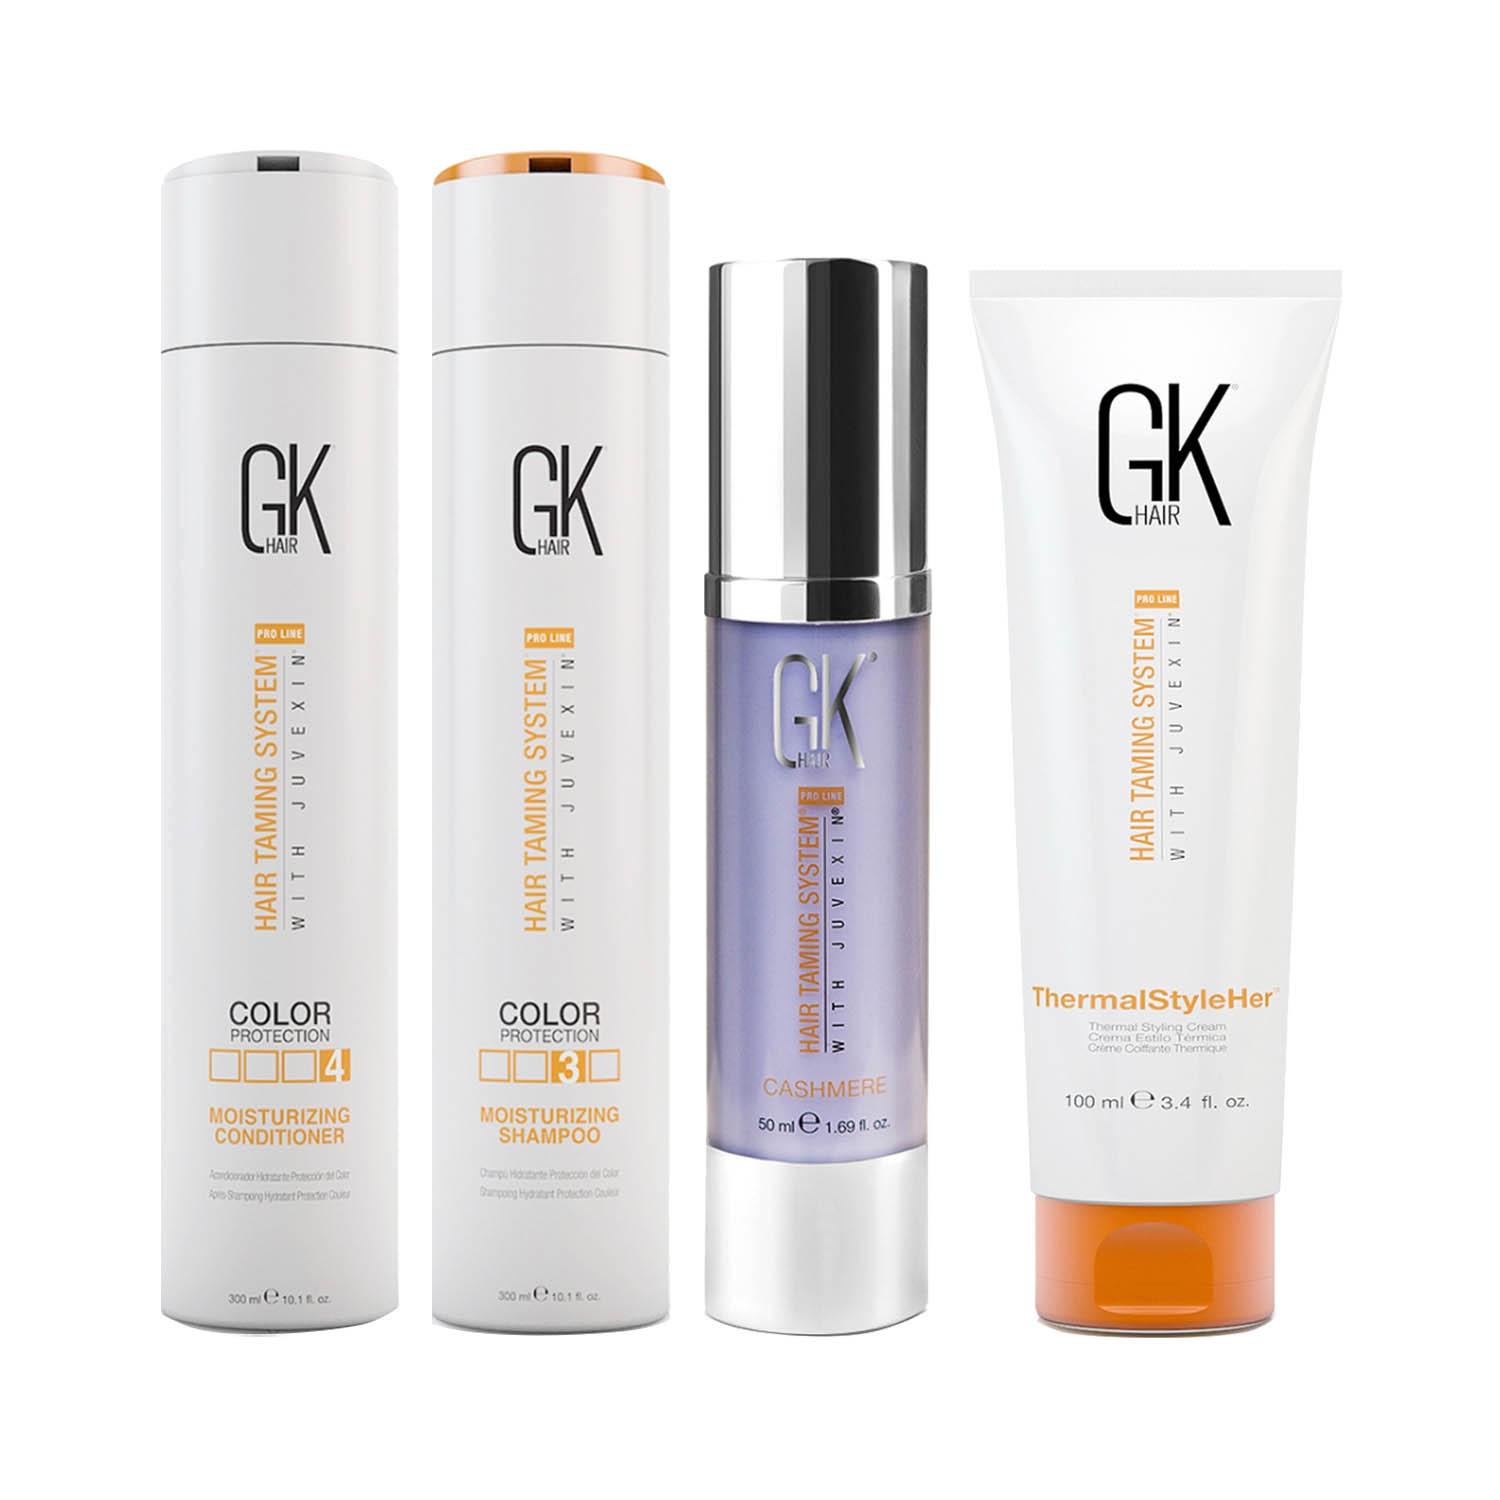 GK Hair | GK Hair Moisturizing Shampoo and Conditioner 300ml with Cashmere 50ml and Thermal styler Cream 100ml